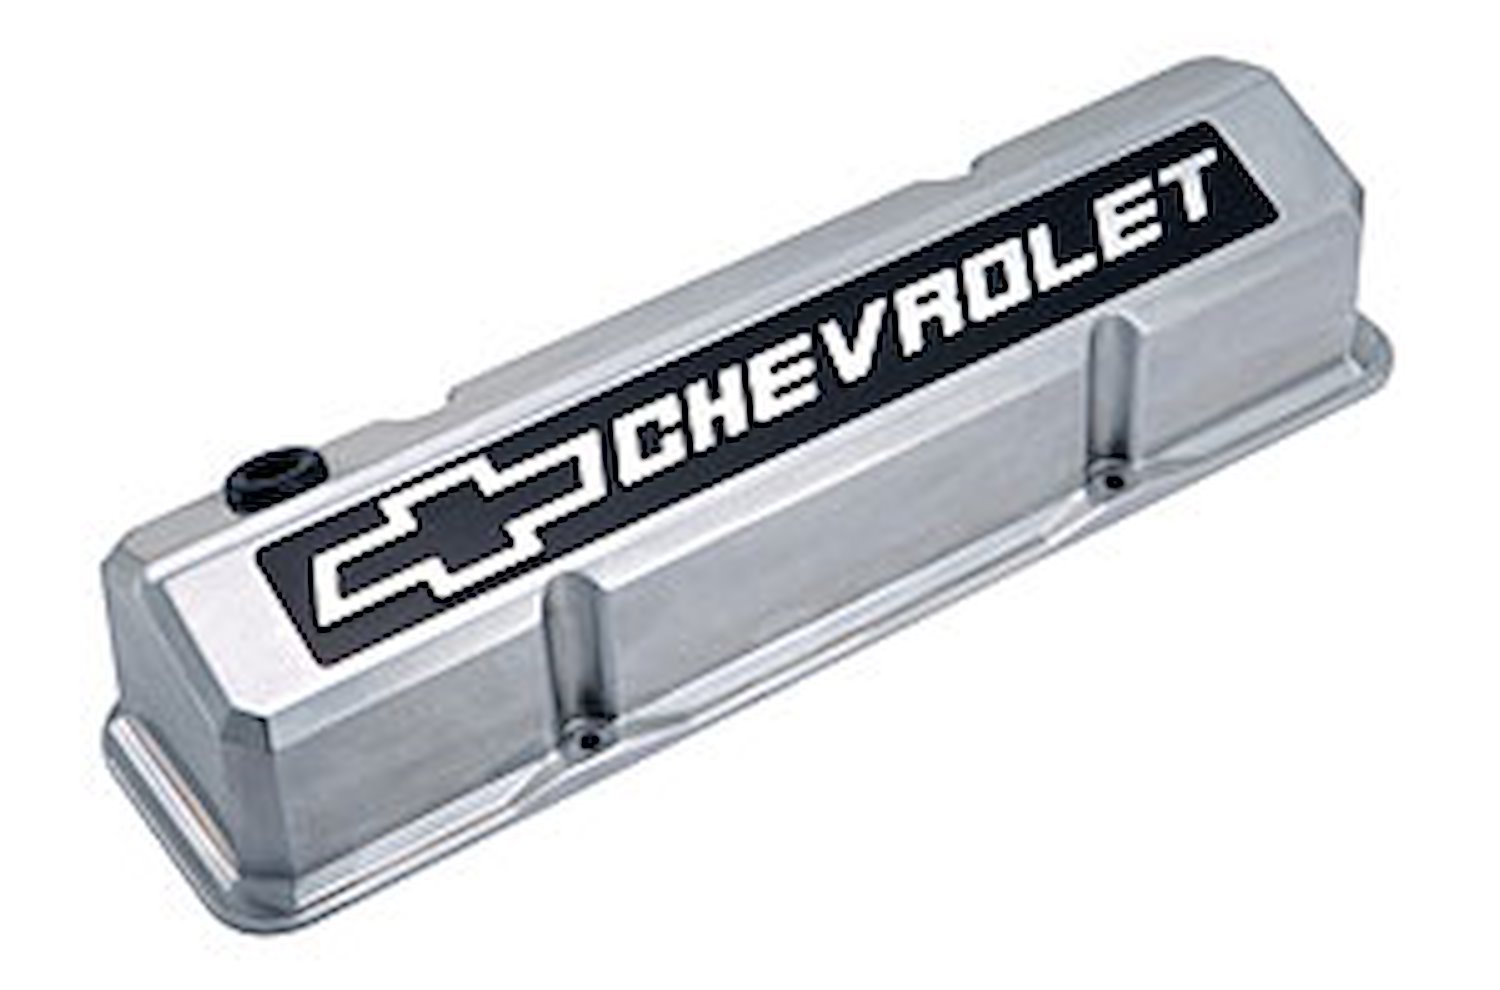 Die-Cast Slant-Edge Valve Covers for 1958-1986 Small Block Chevy with Chevrolet/Bowtie Raised Emblem in Polished/Black Finish